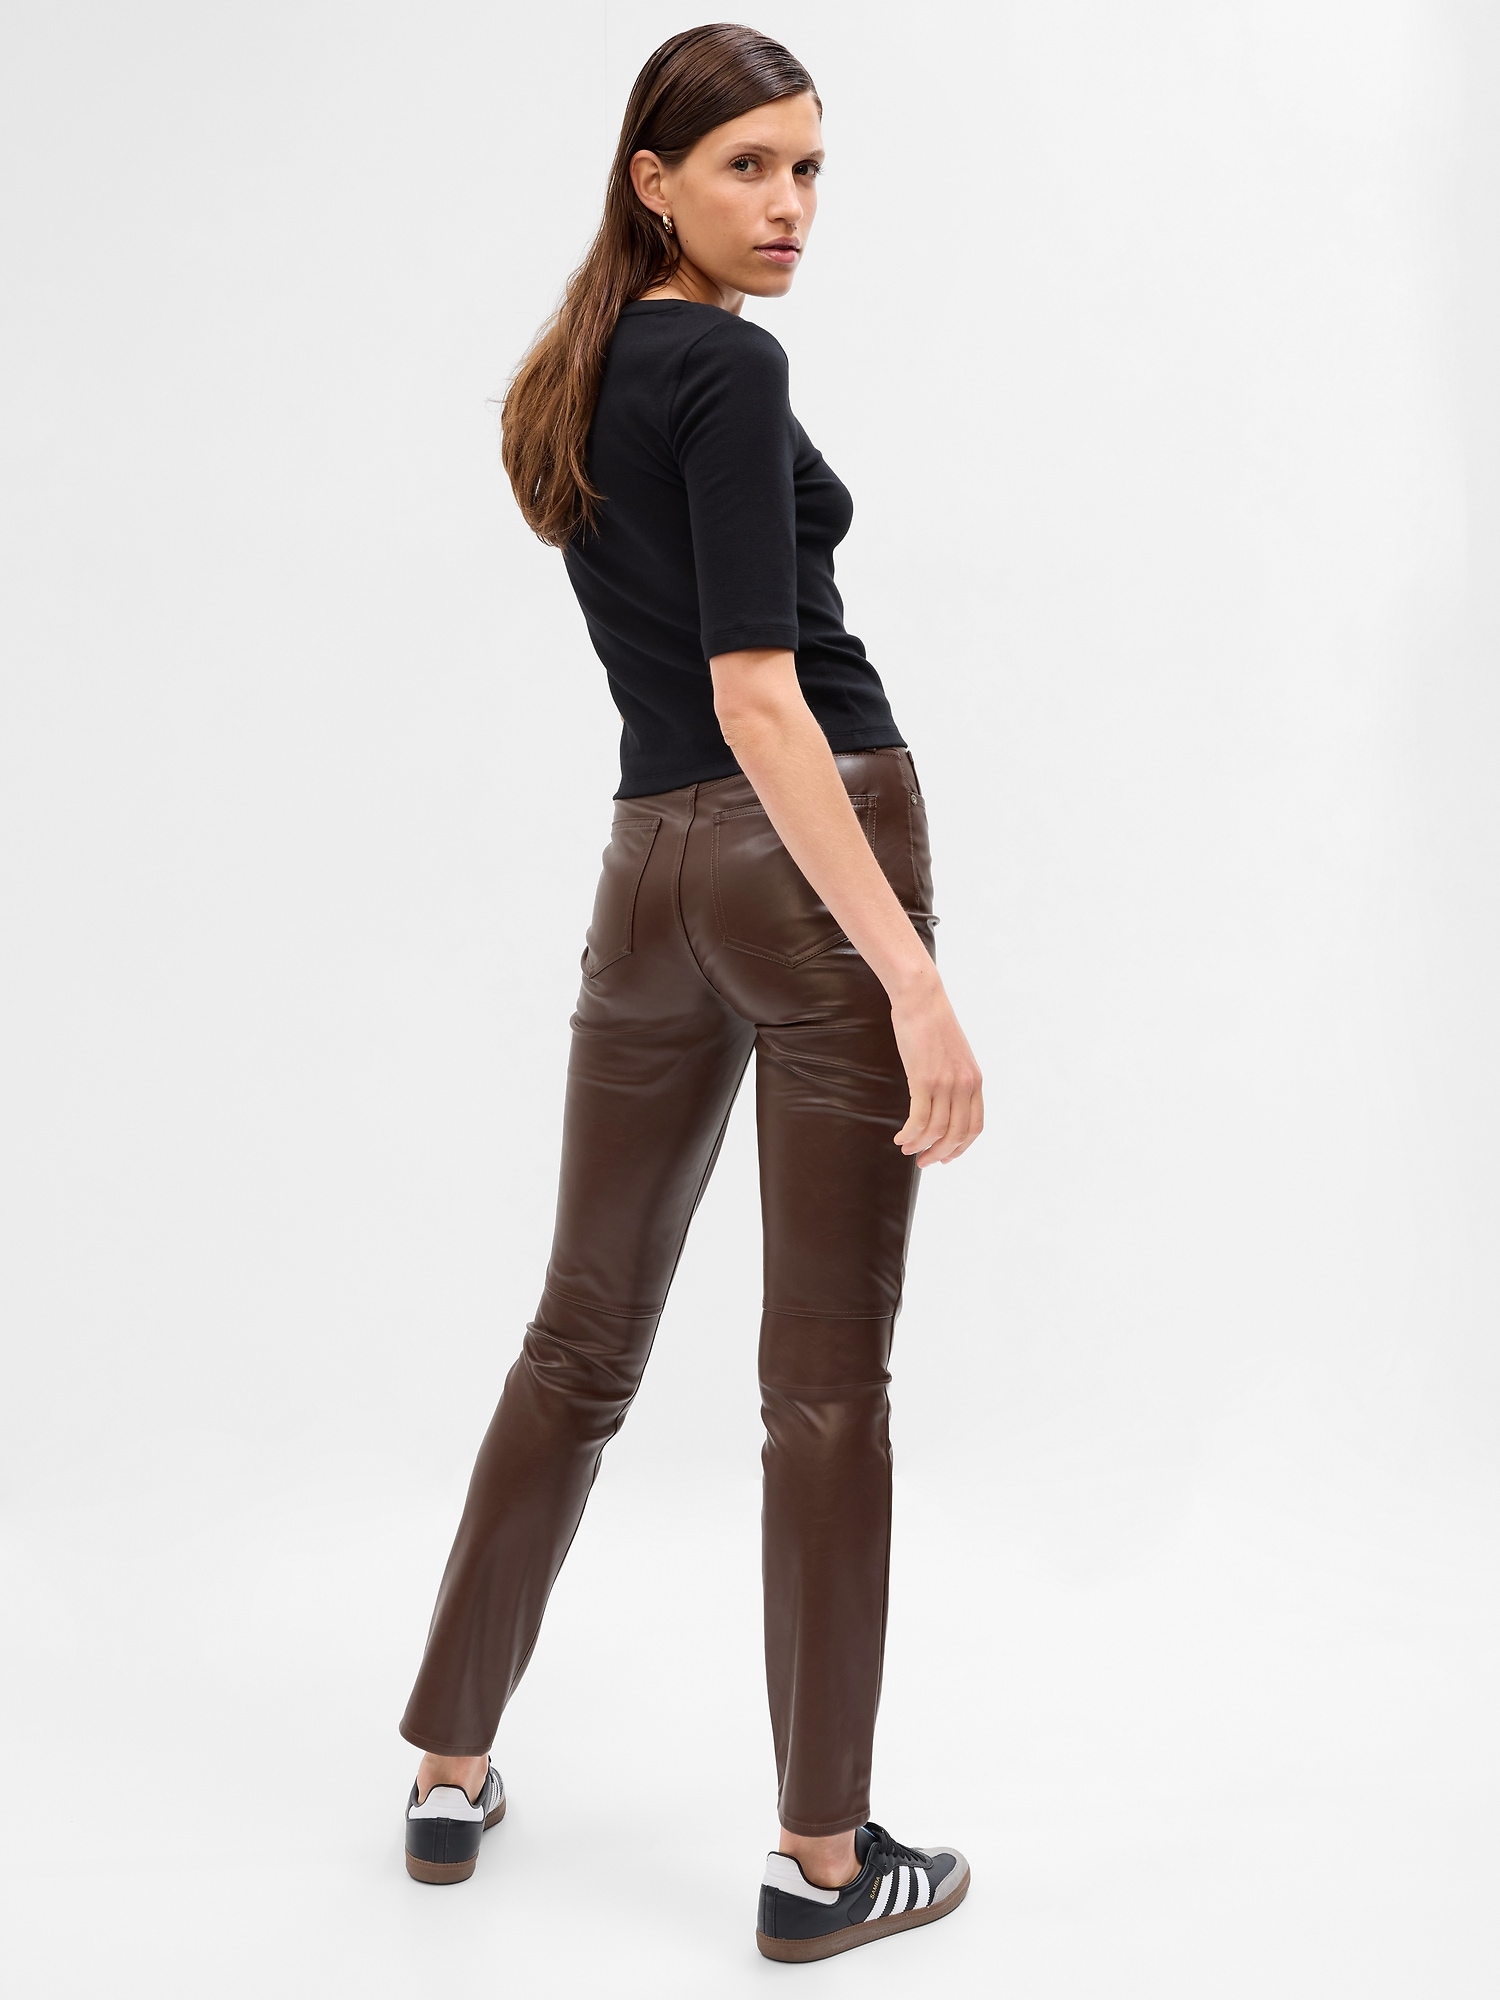 Brown Leather Pants